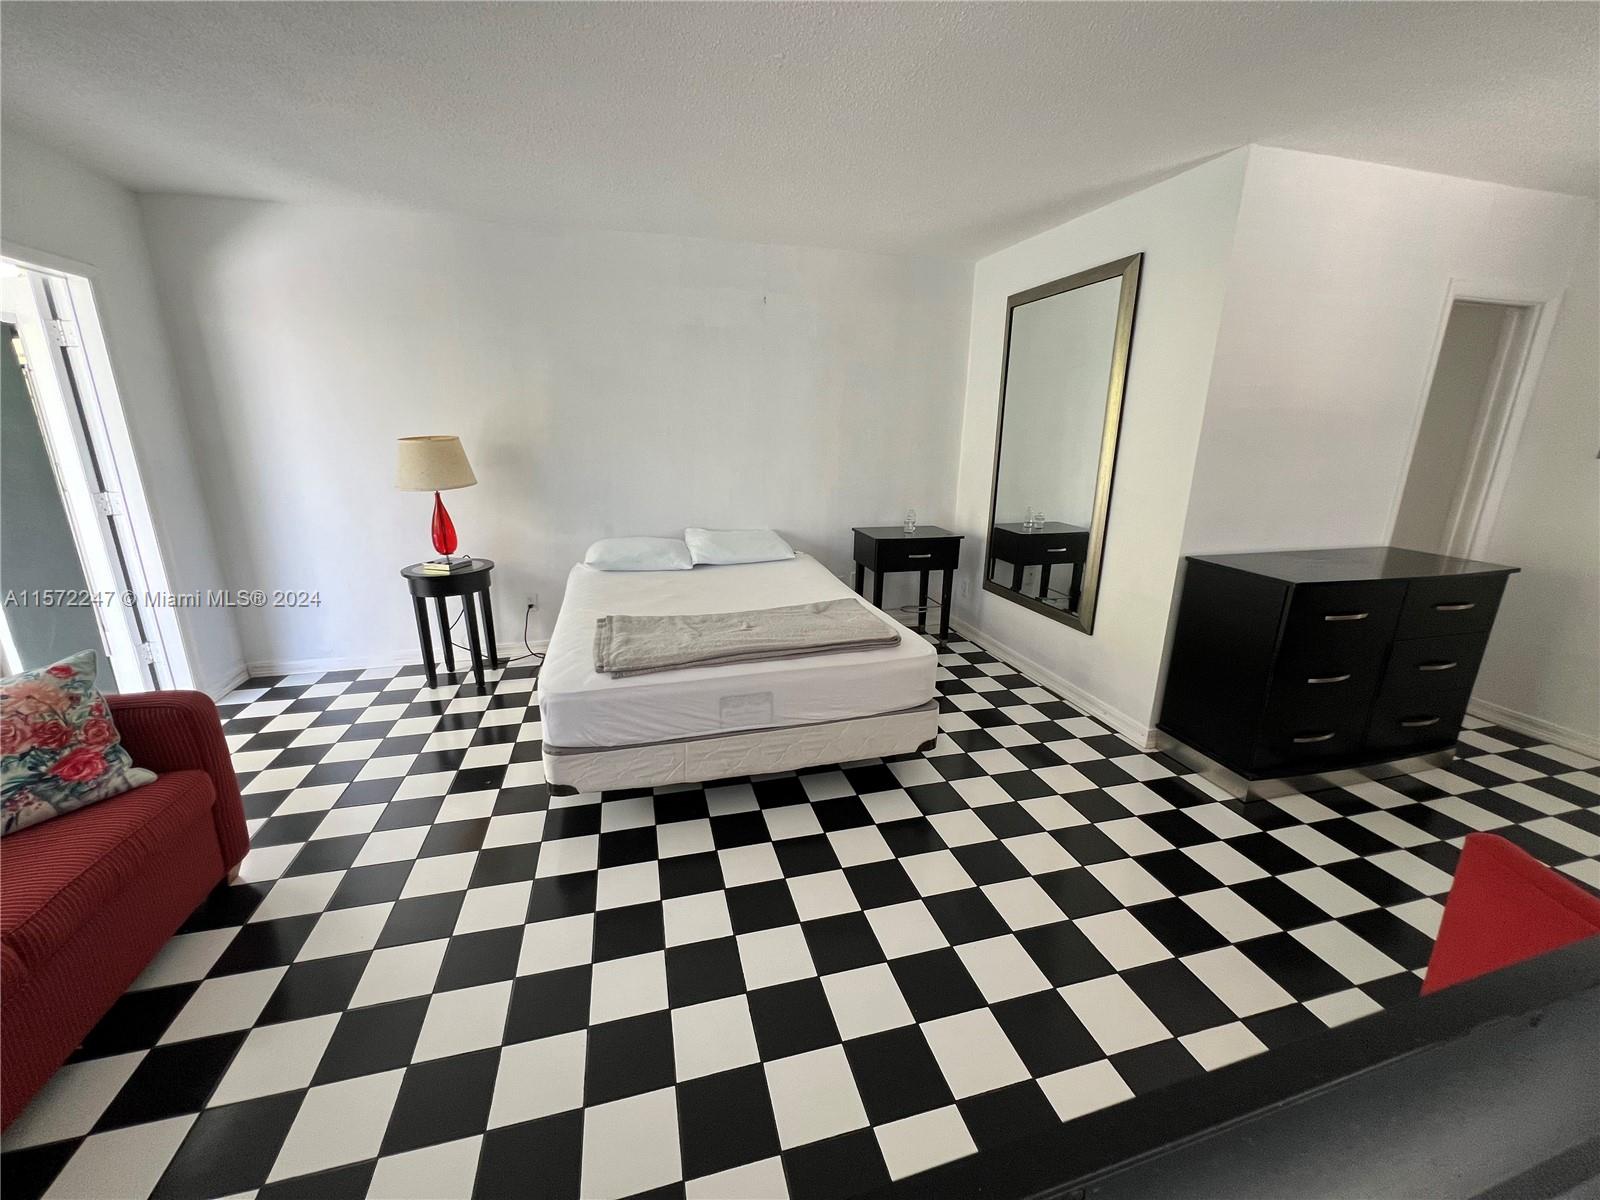 a living room with a black white checkered floor with a black white checkered floor